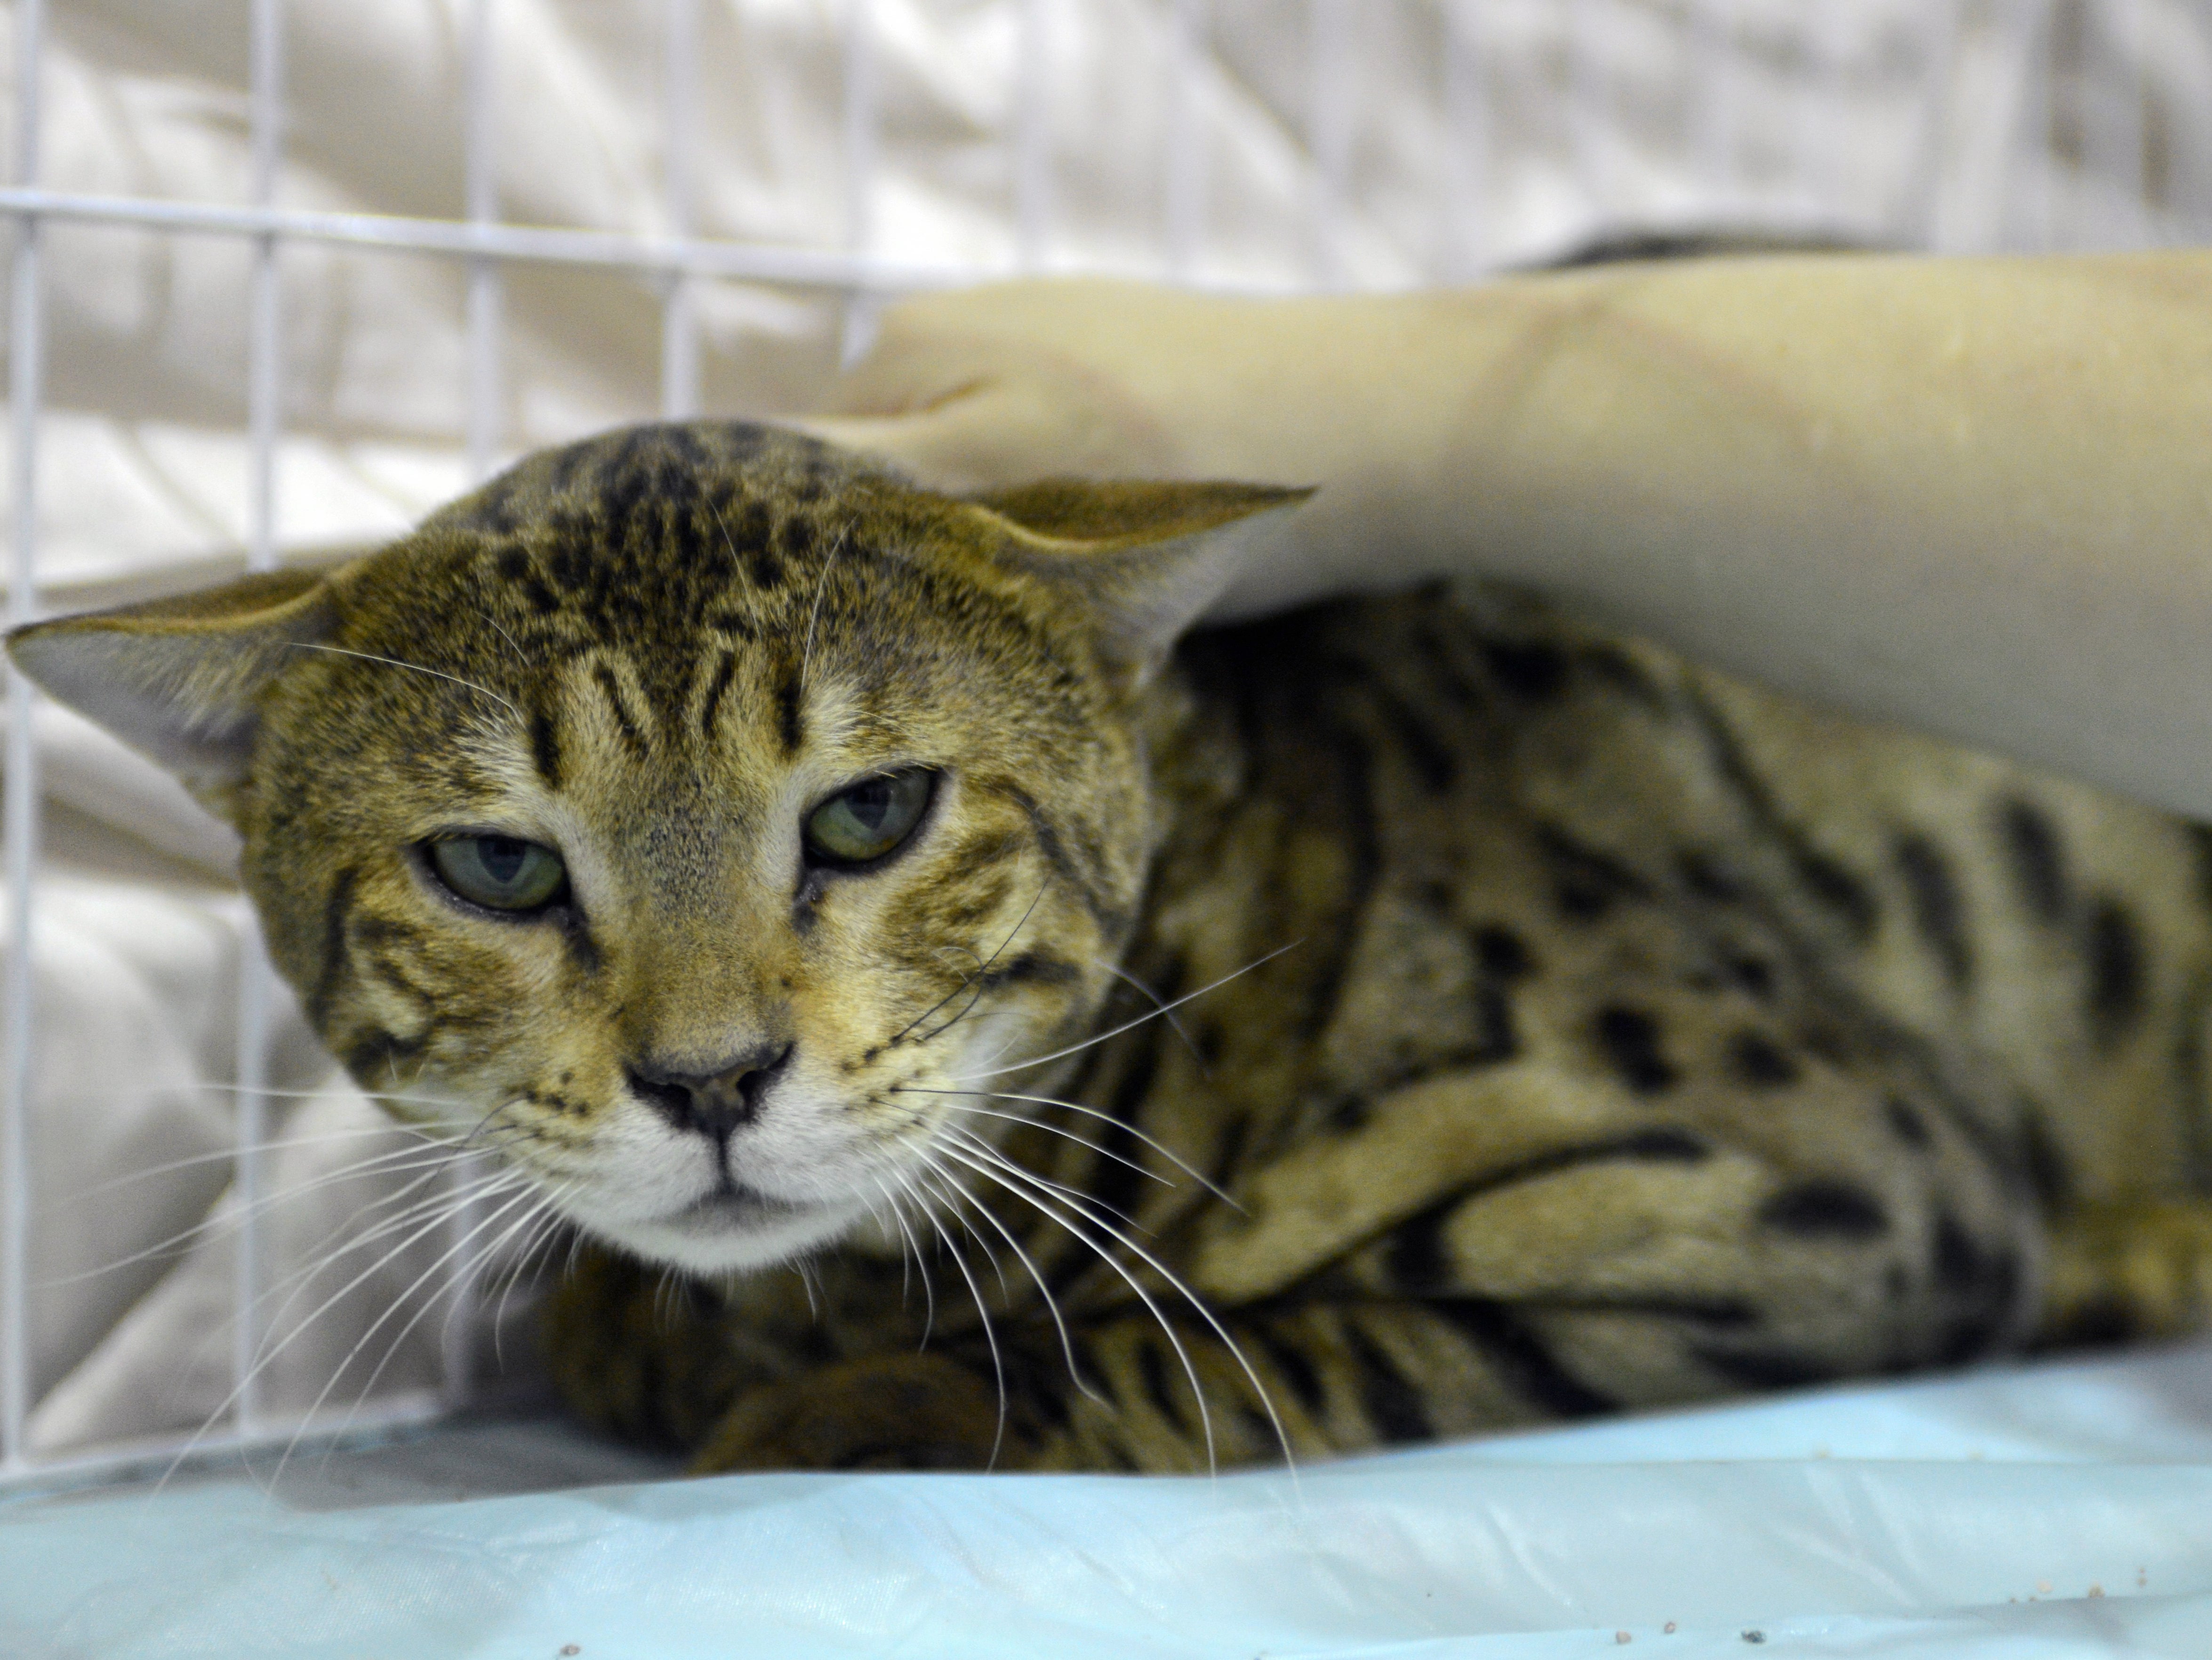 Savannah cats are traded for thousands of pounds